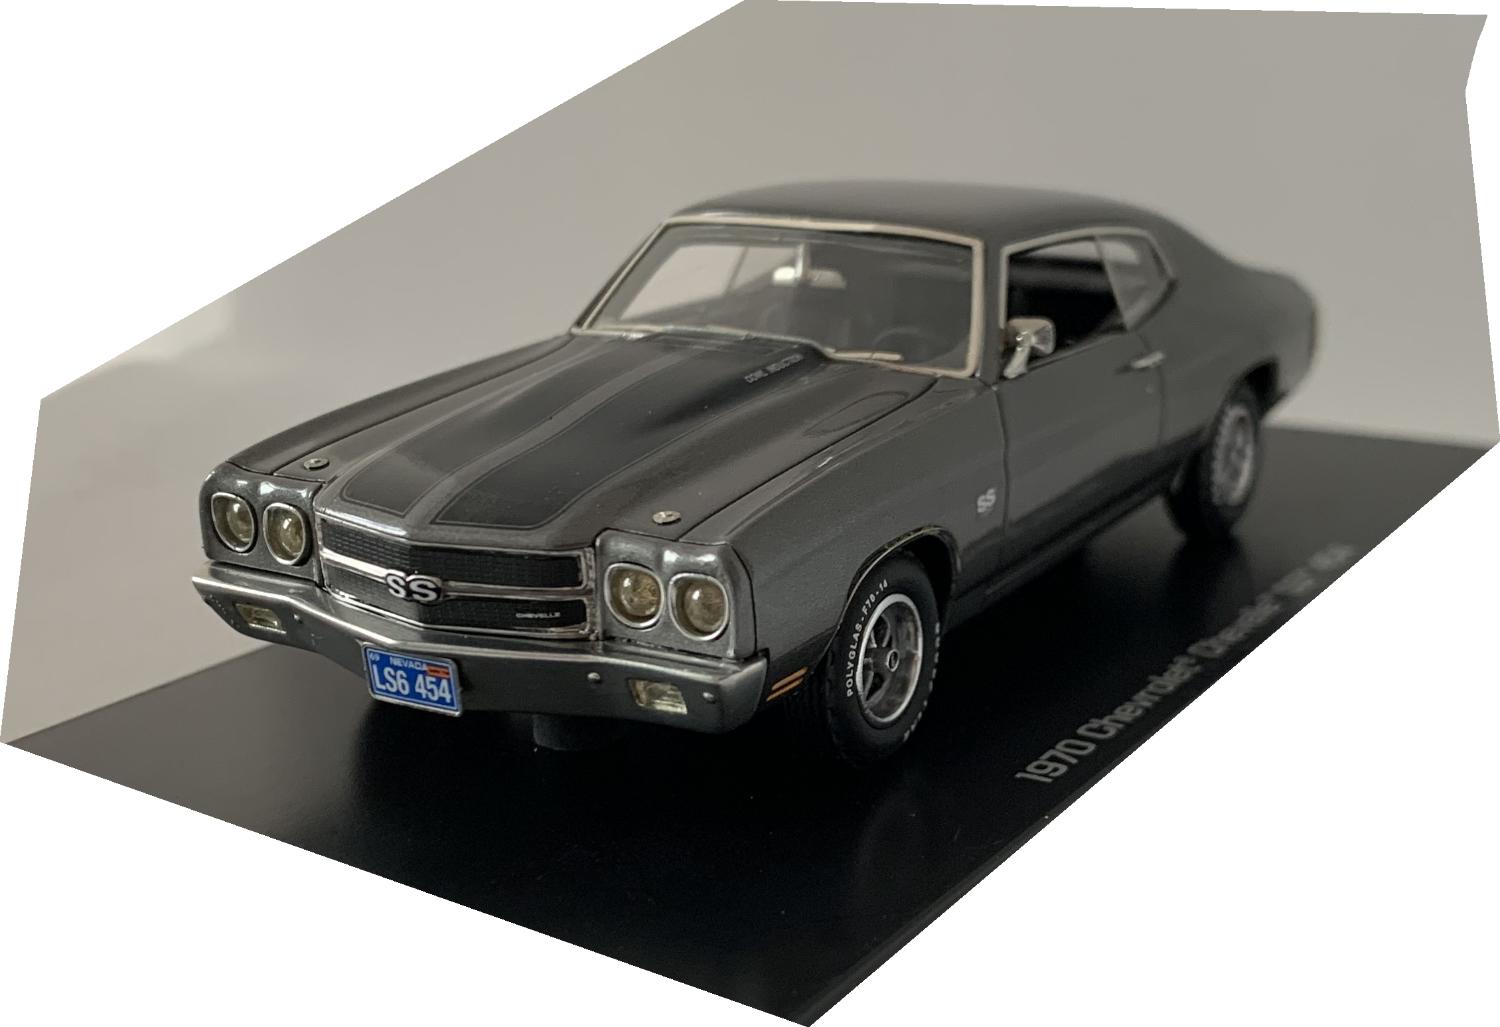 An excellent reproduction of the Chevrolet Chevelle SS 454 with detail throughout, all authentically recreated.  Model is mounted on a removable plinth with a removable hard plastic cover